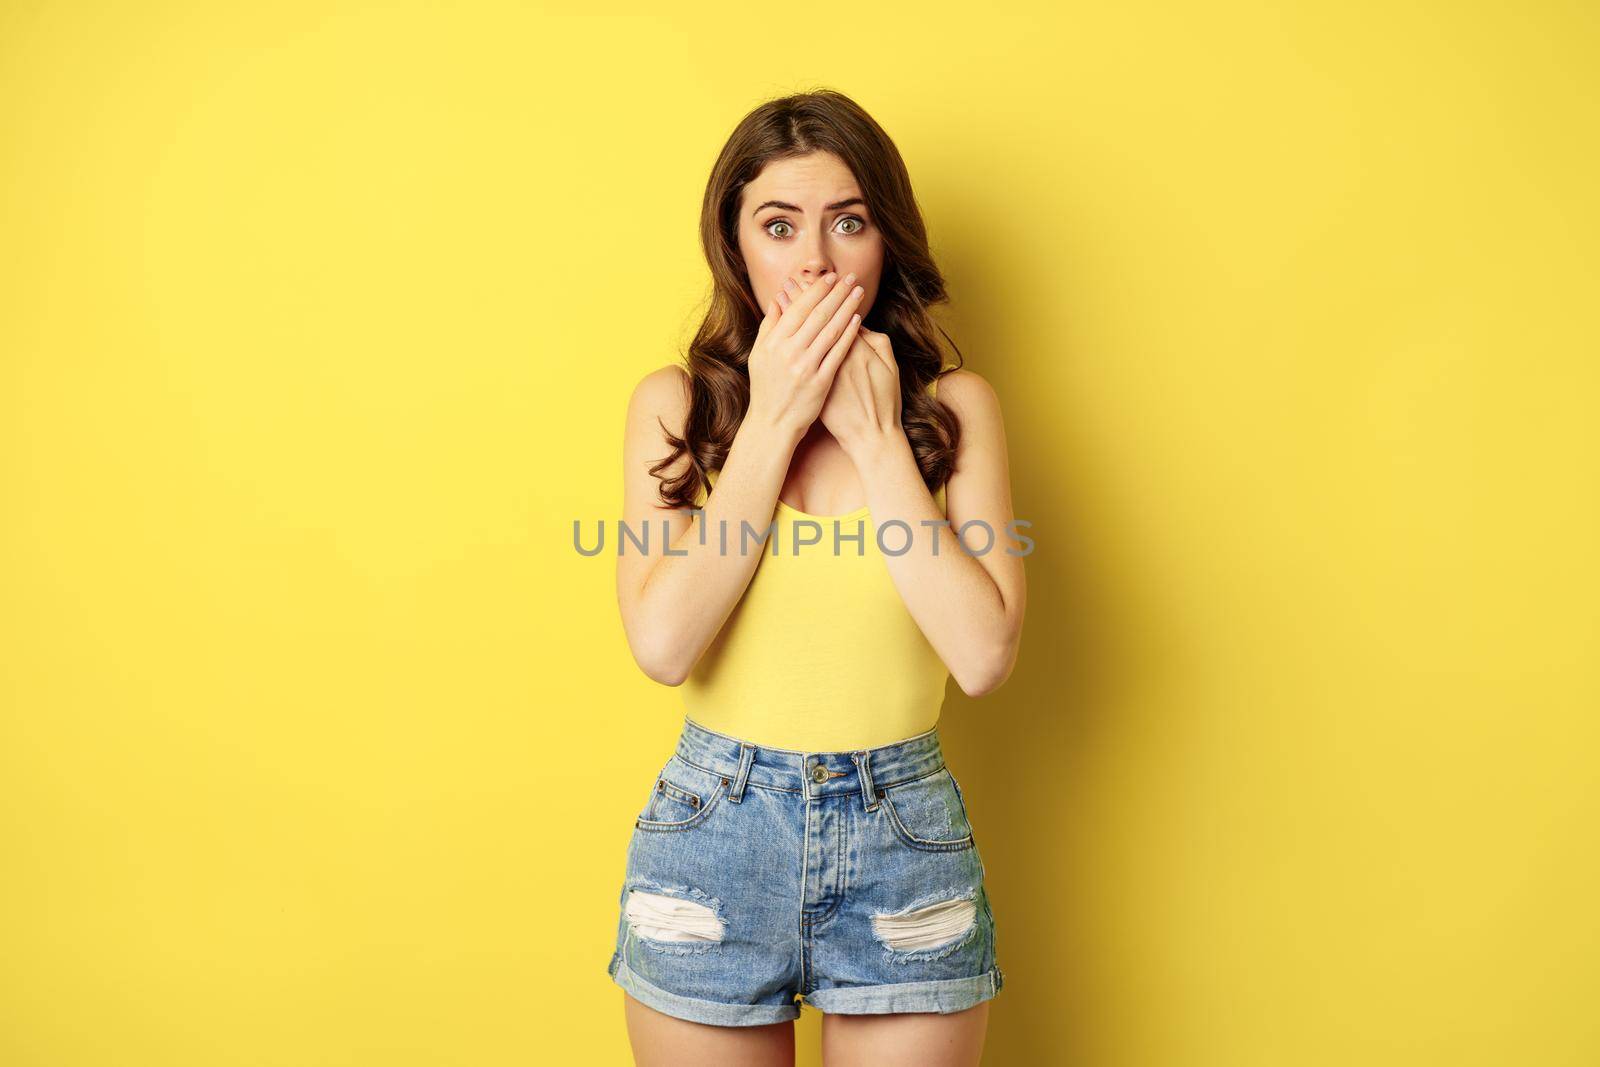 Shocked and scared young woman gasping, covering mouth with palms, looking frightened and startled, standing over yellow background.